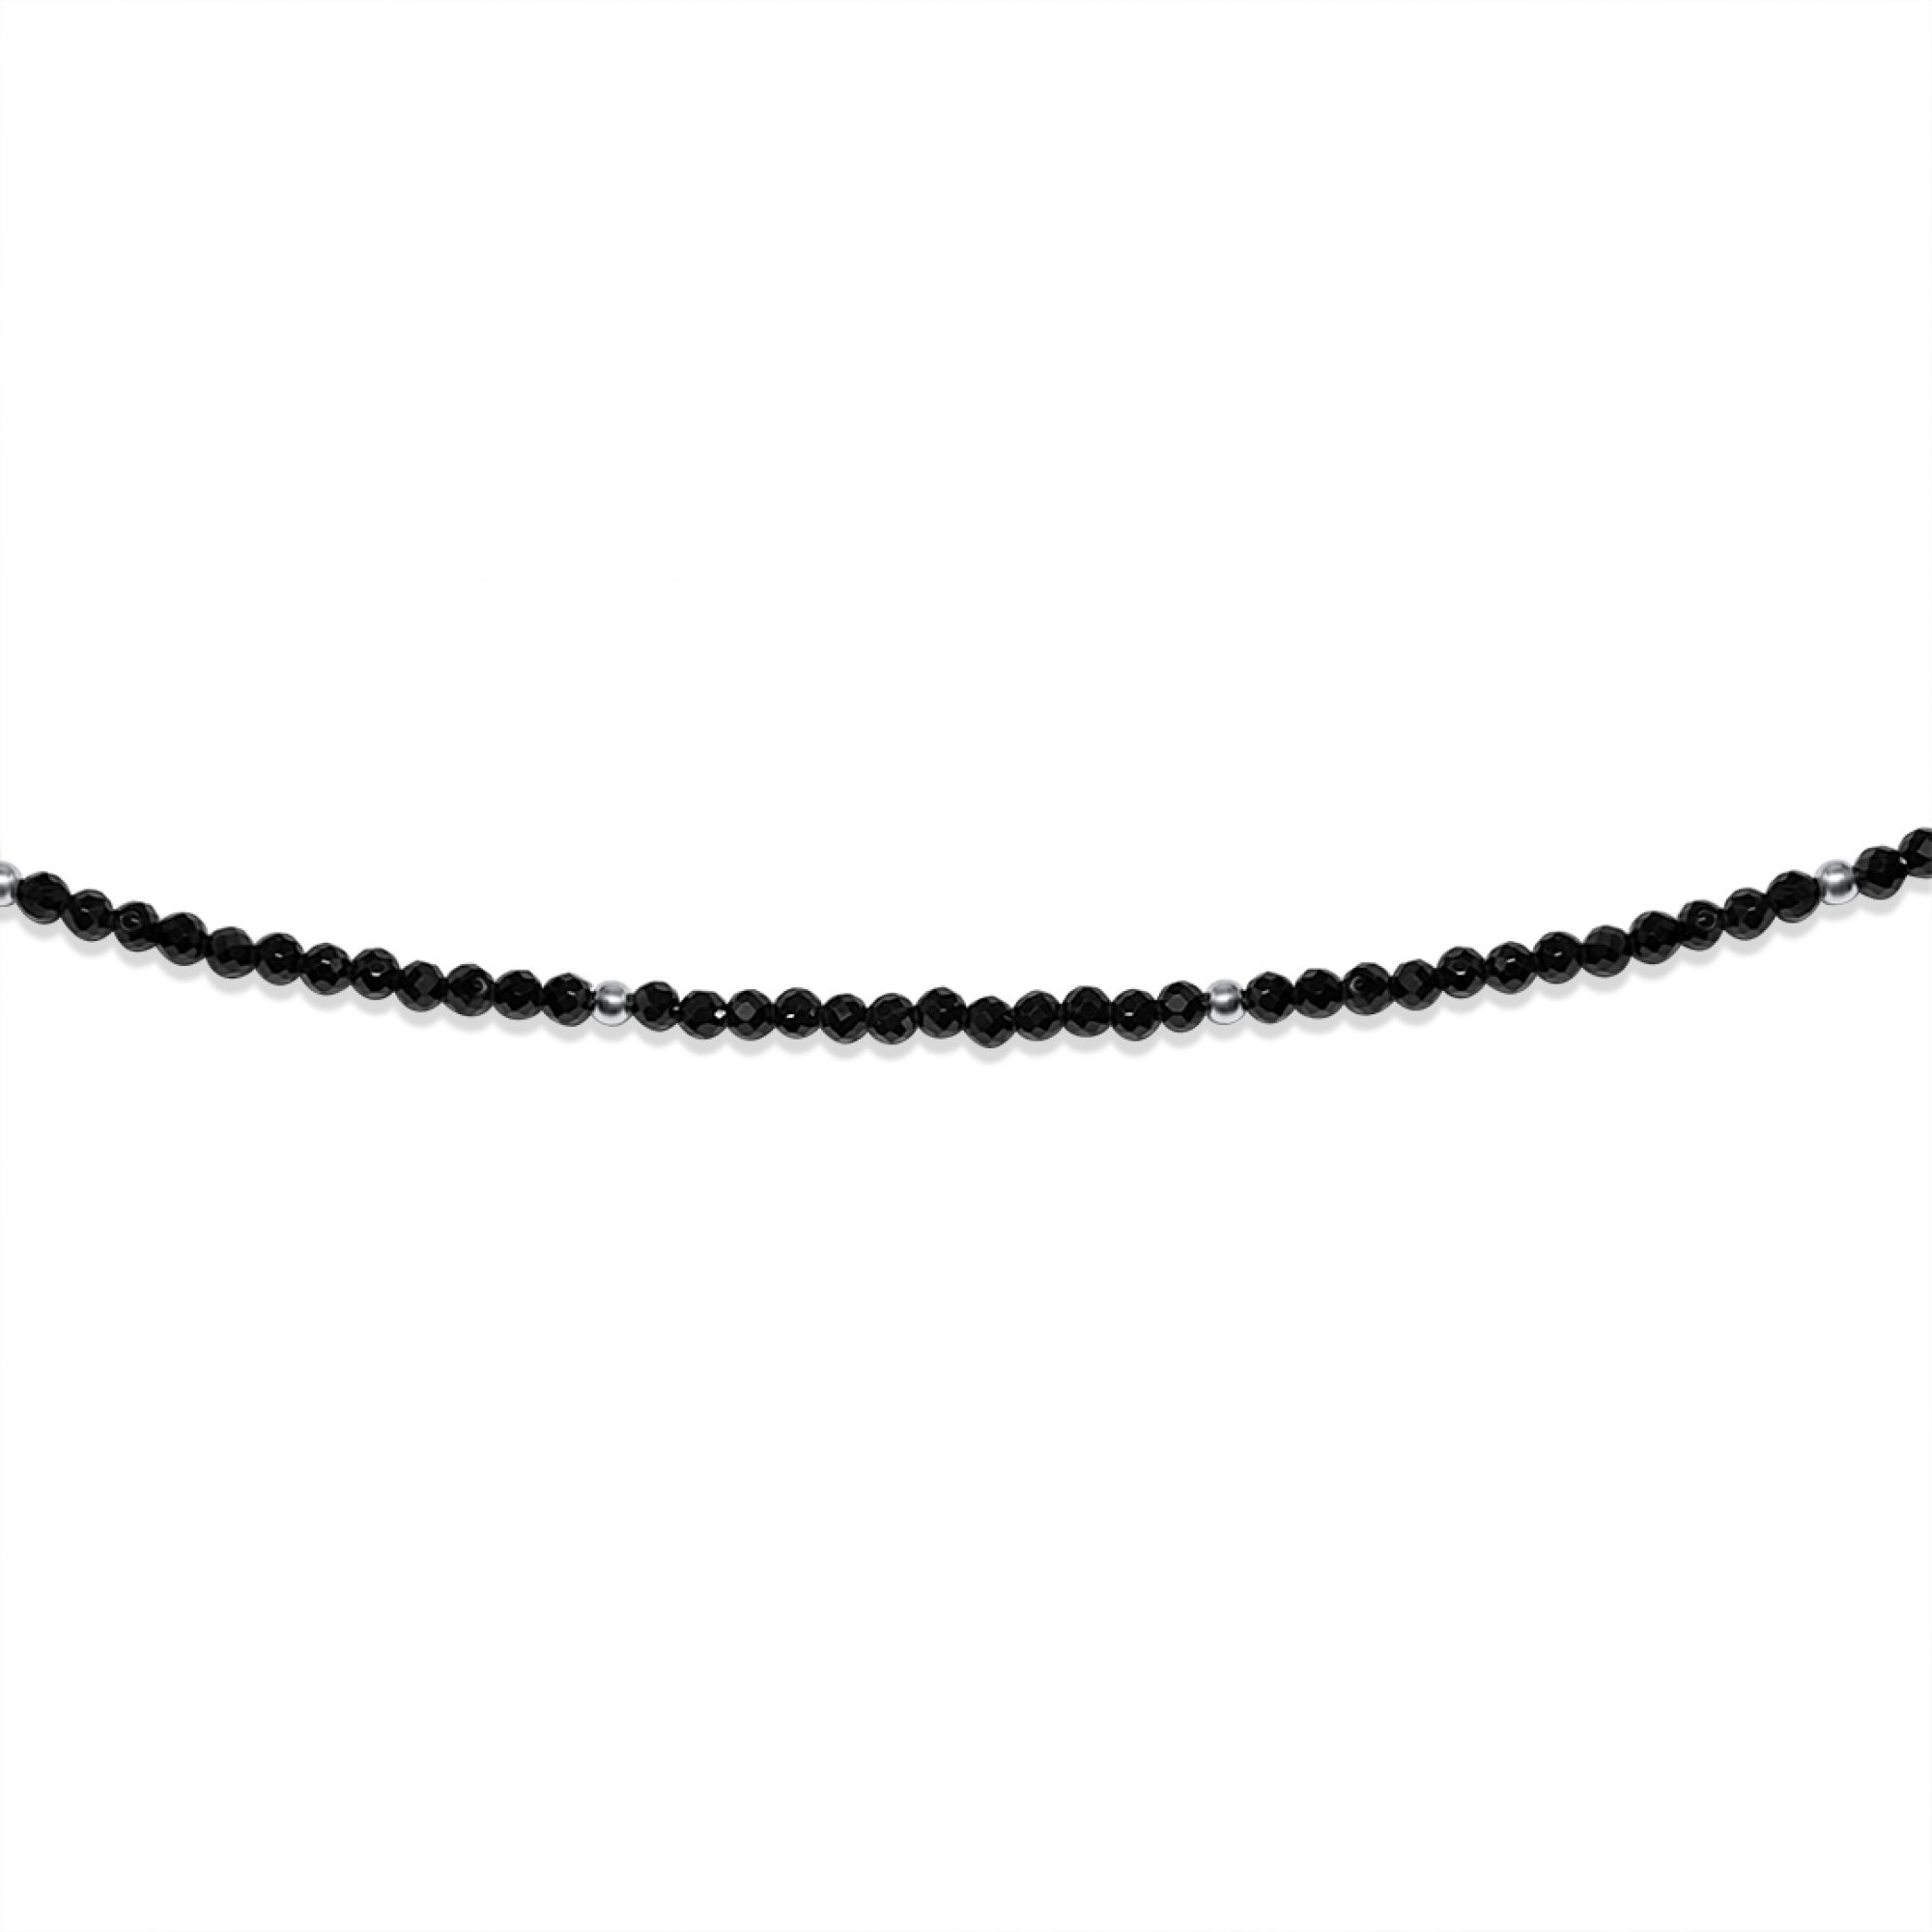 Anklet with onyx beads